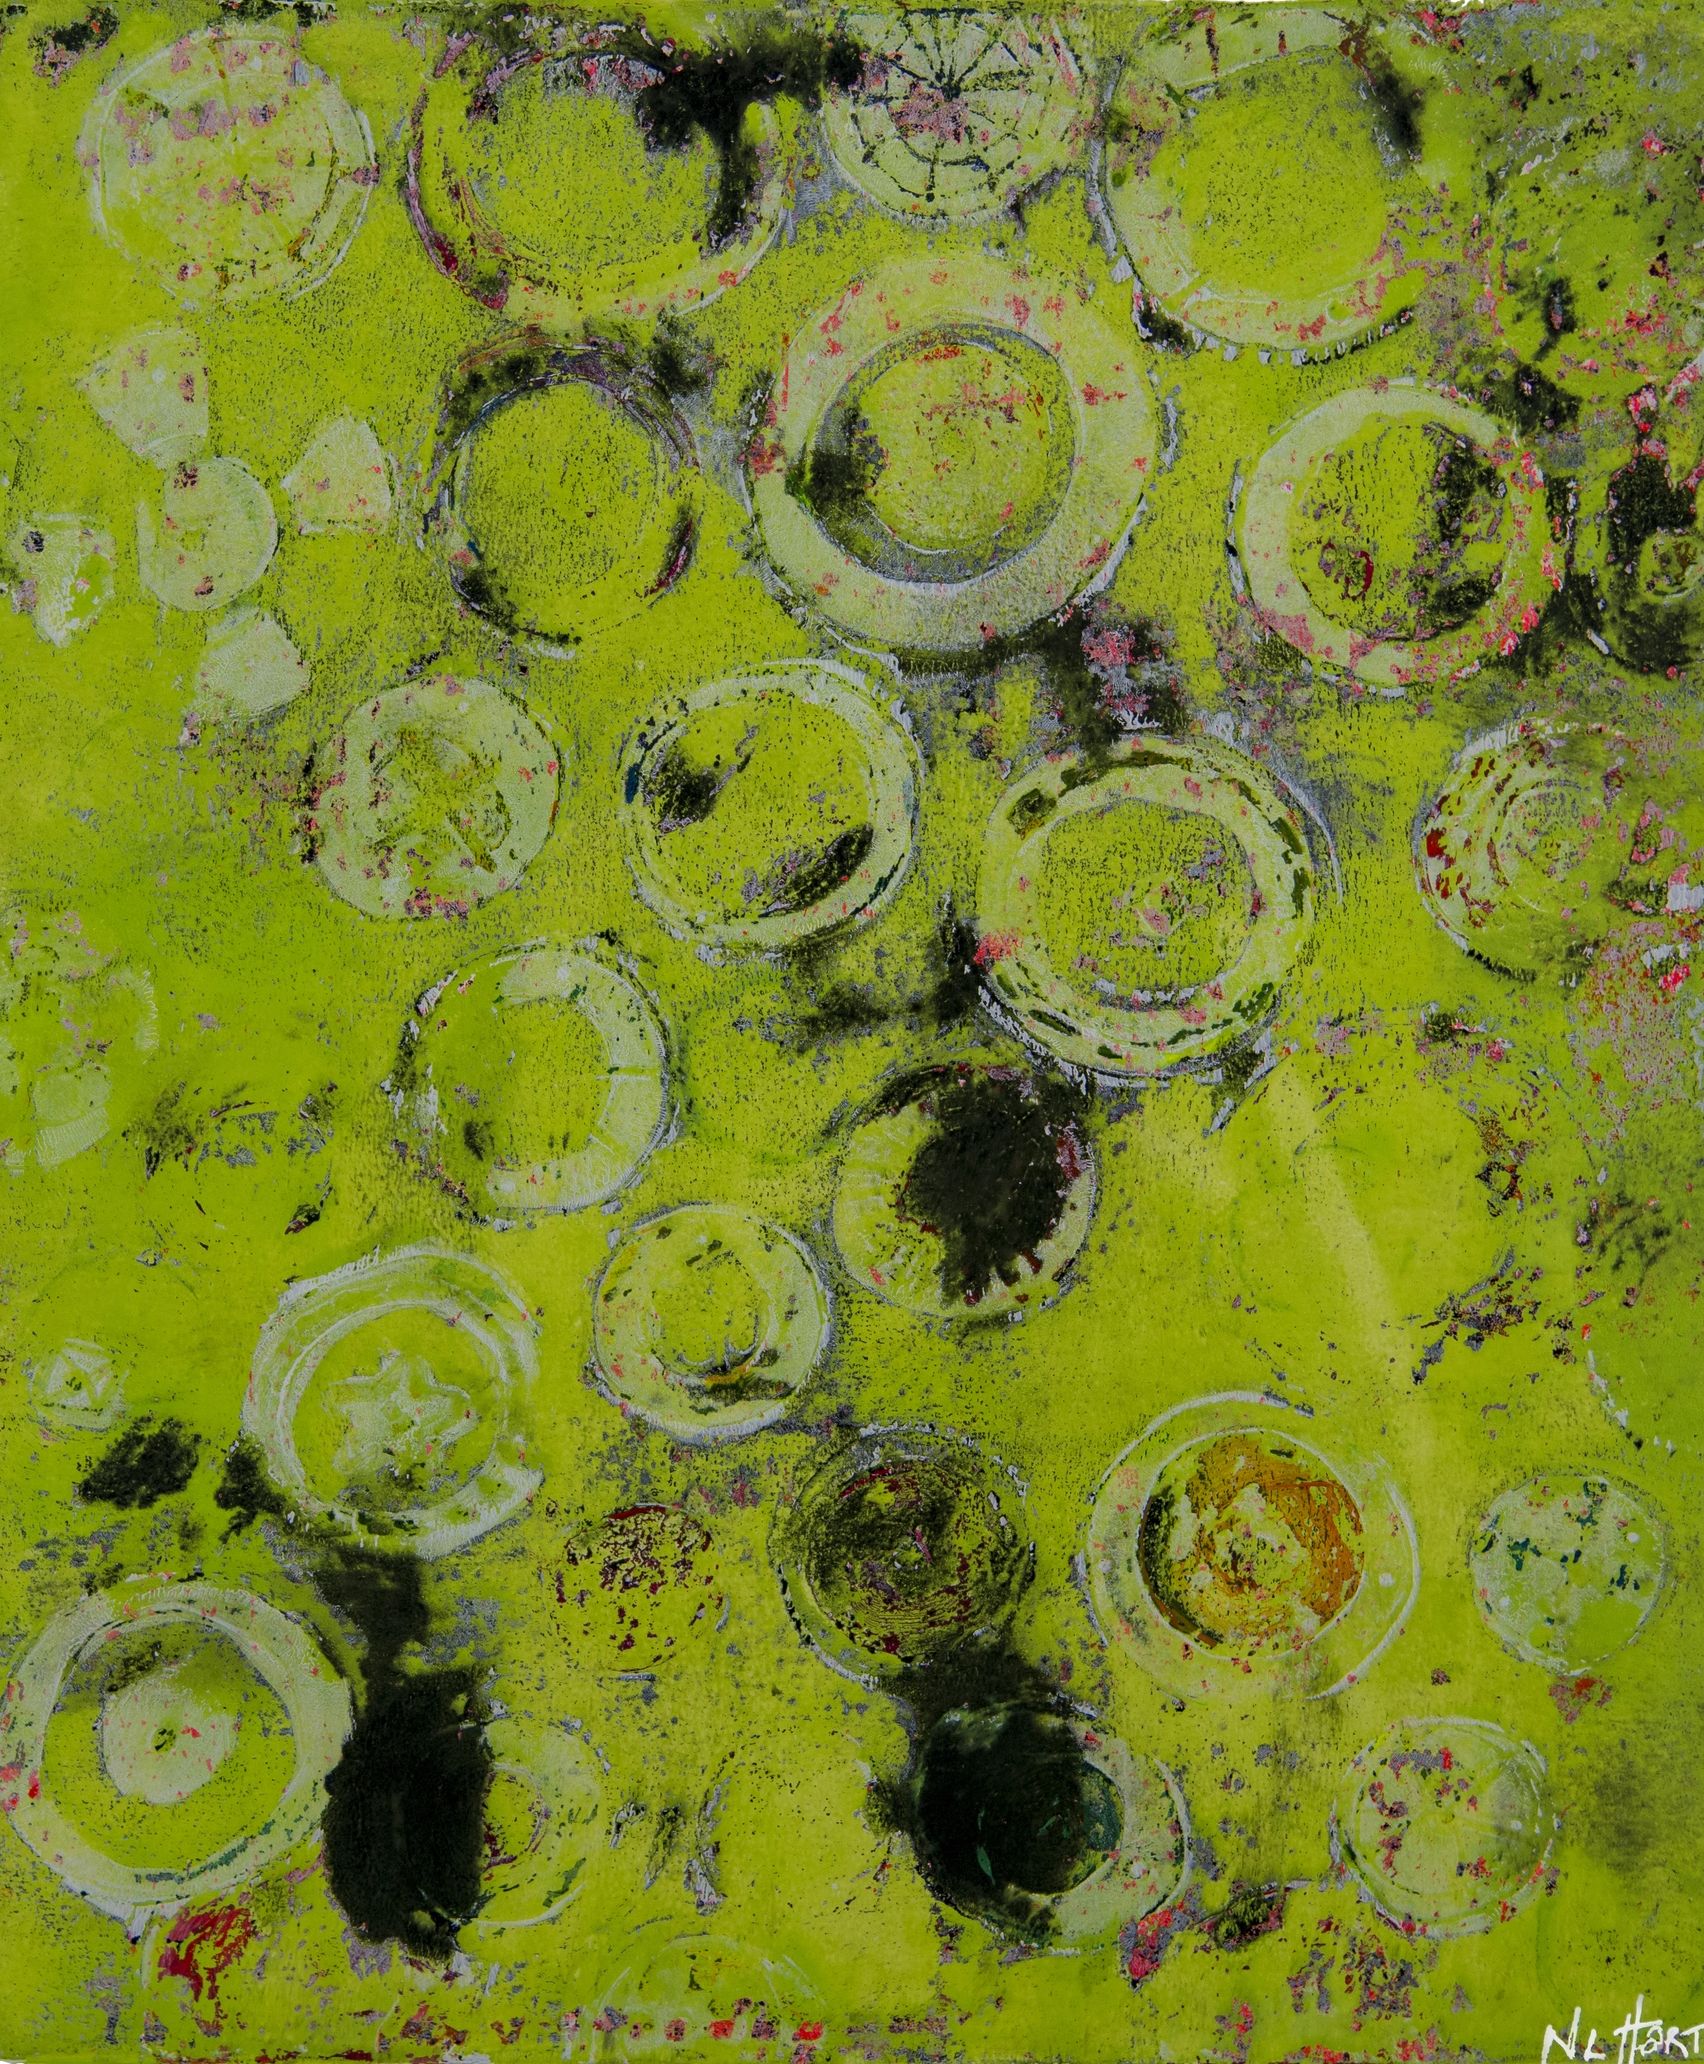 monotype on gelatin printing plate lime green with multi colored circles